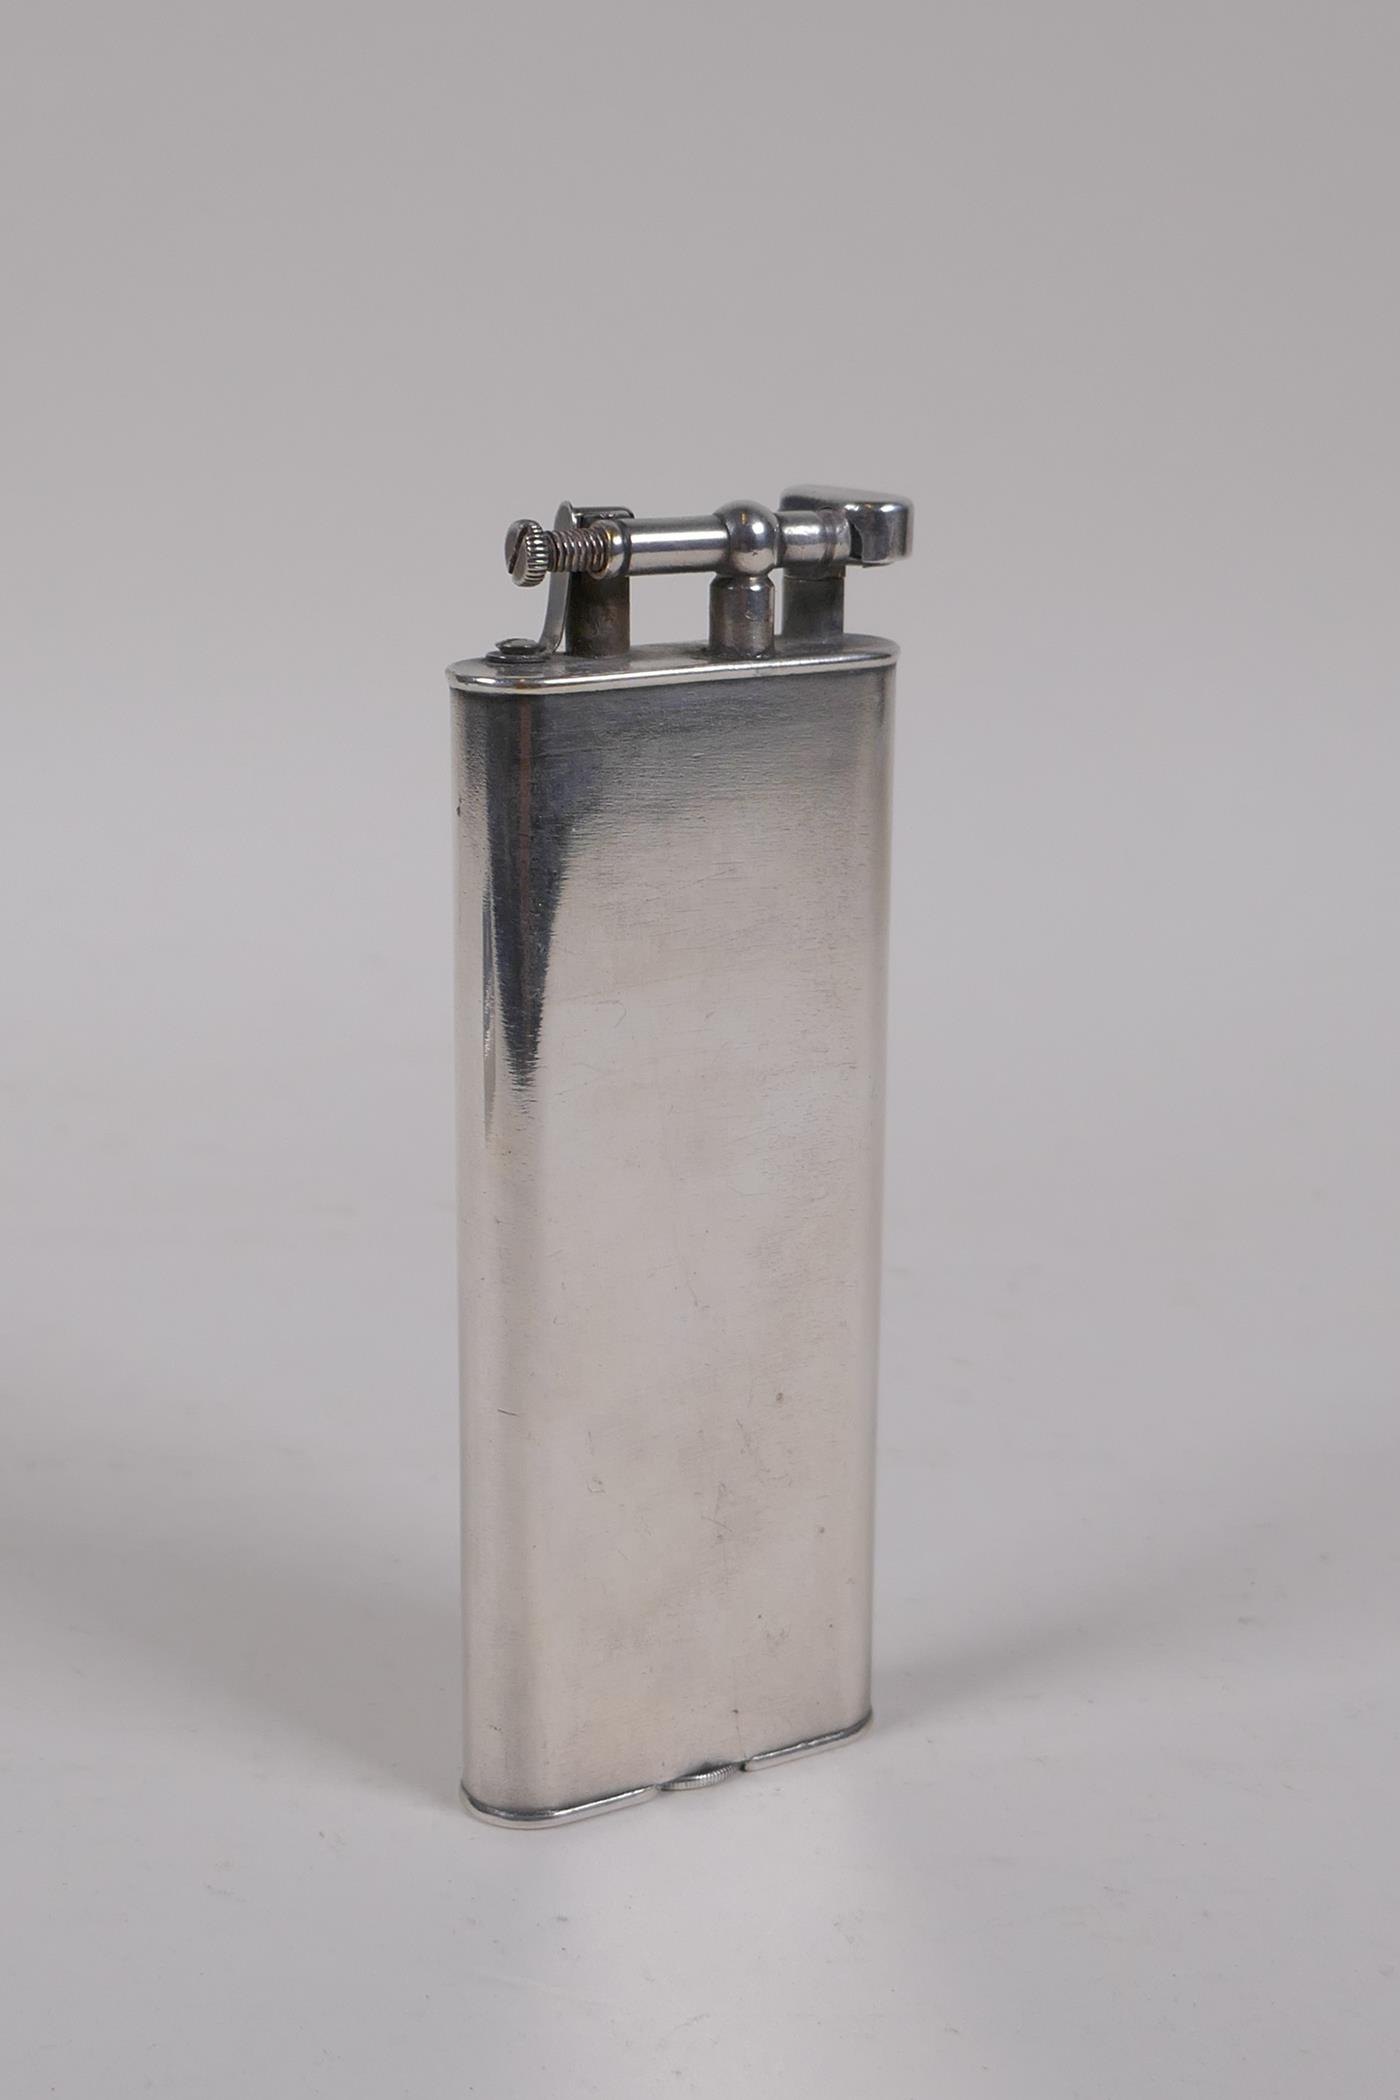 A W&G/Dunhill unique club size lighter, Pat.No. 143752, 12cm high Please note: buyers outside of the